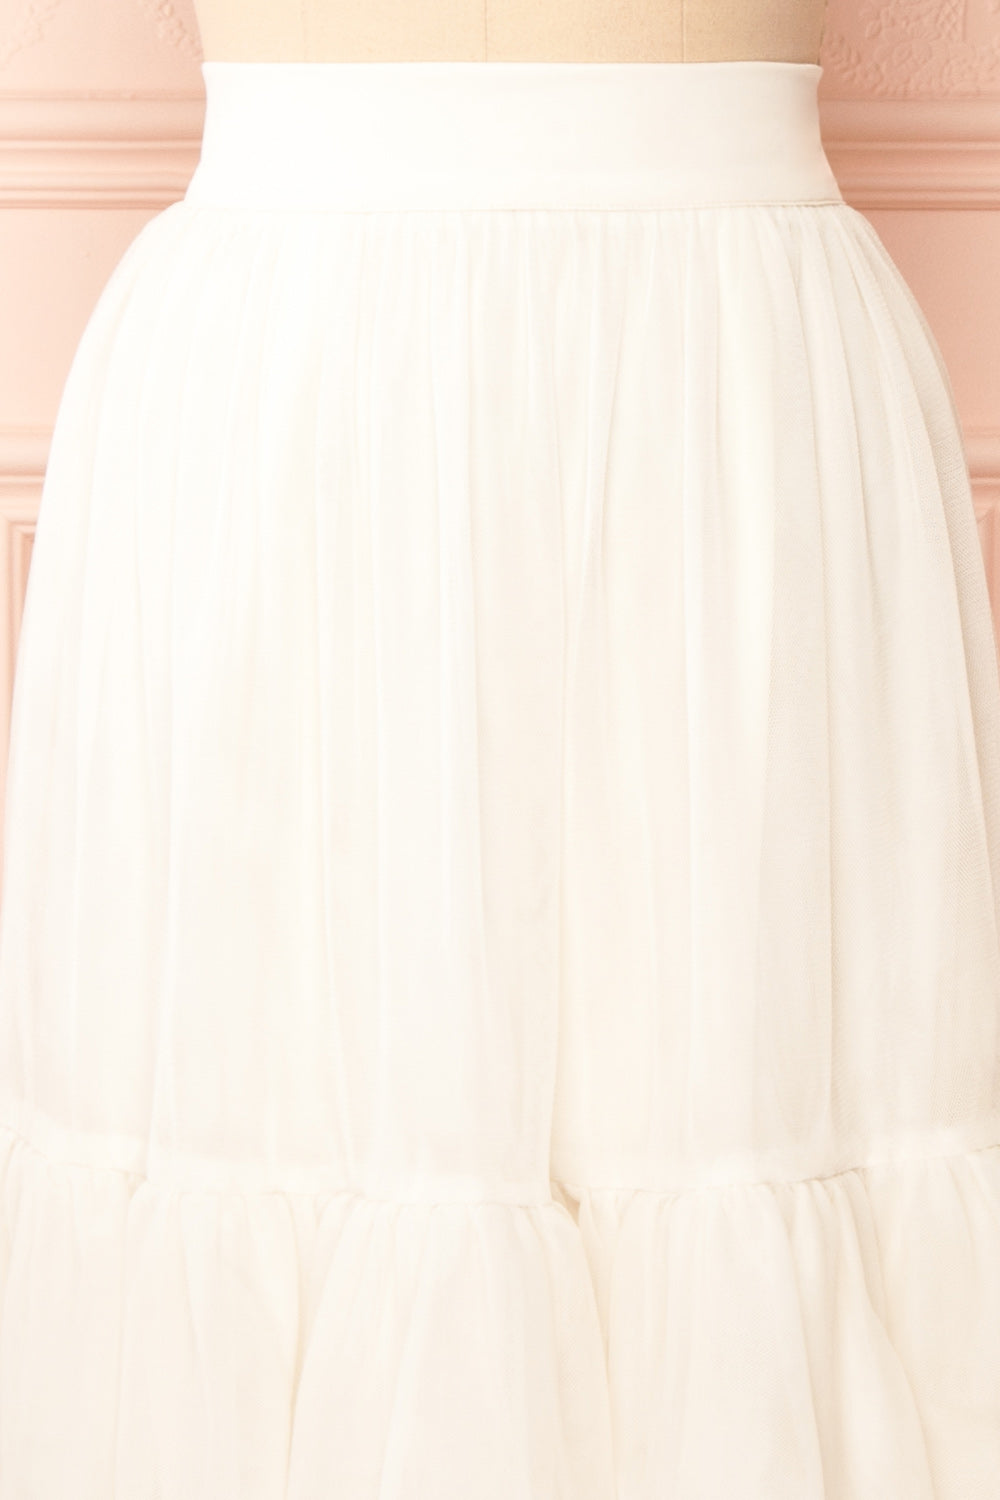 Ariette Ivory High-Waisted Tiered Tulle Skirt | Boutique 1861 front close-up